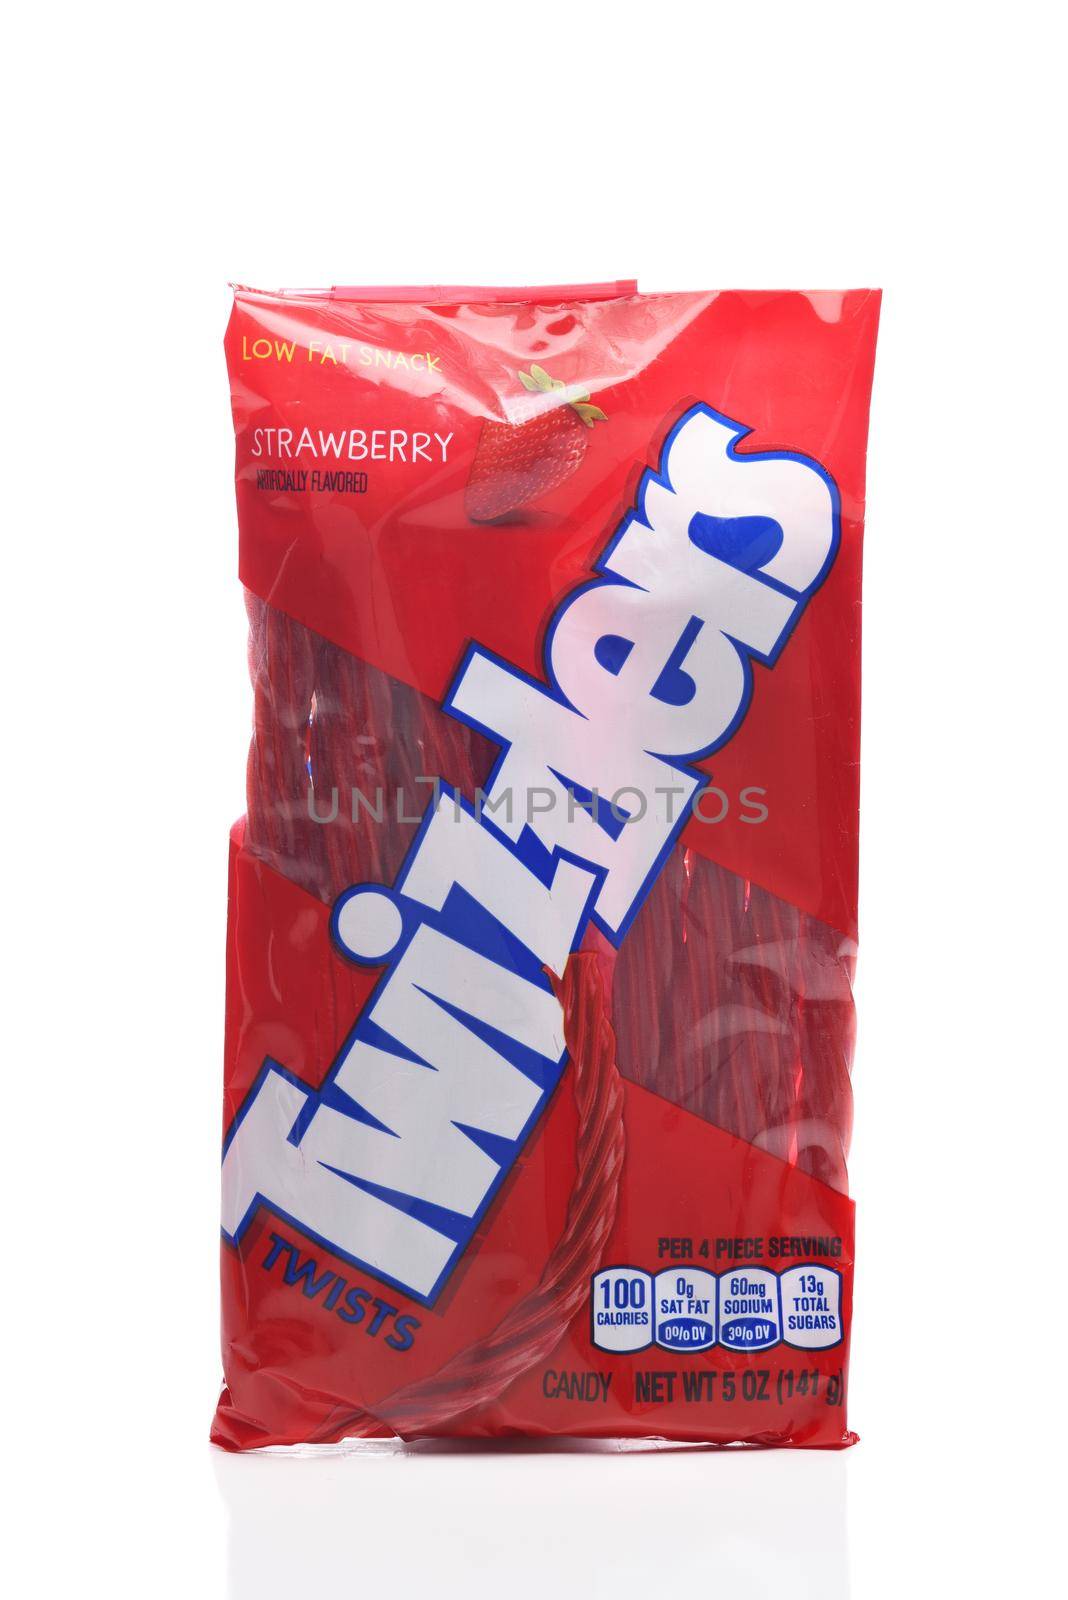 IRIVNE, CALIFORNIA - 3 JULY 2021: A package of Twizzler Strawberry Twists candy, from the Hershey Company. by sCukrov